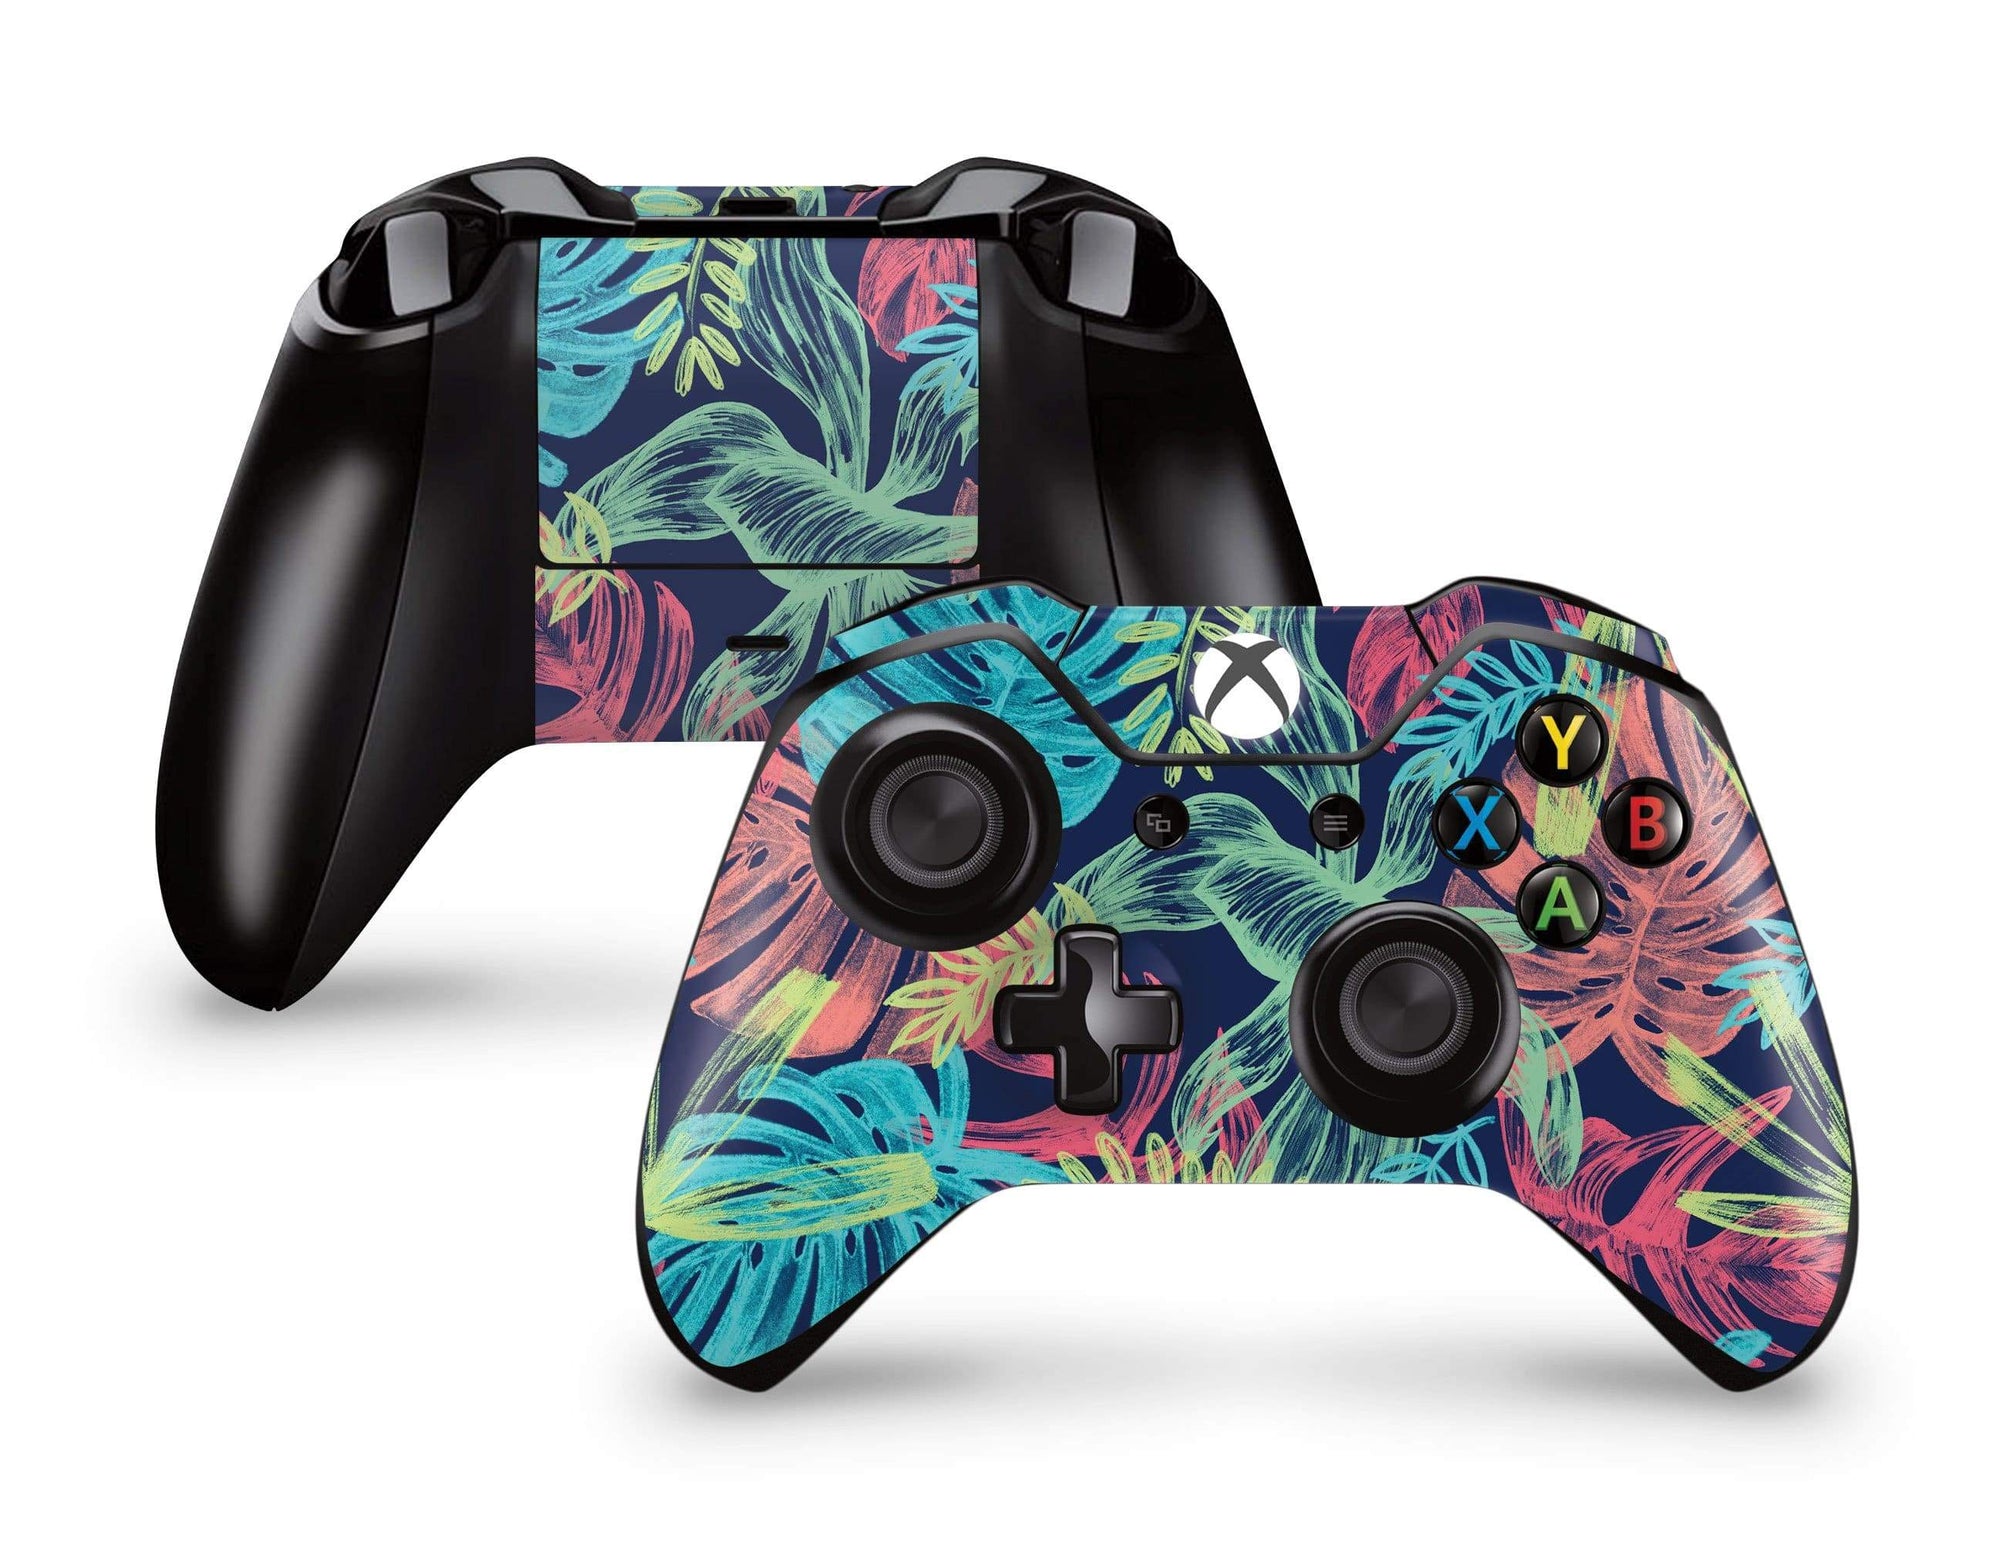 Neon Tropical Leaves Xbox One Controller Skin - StickyBunny